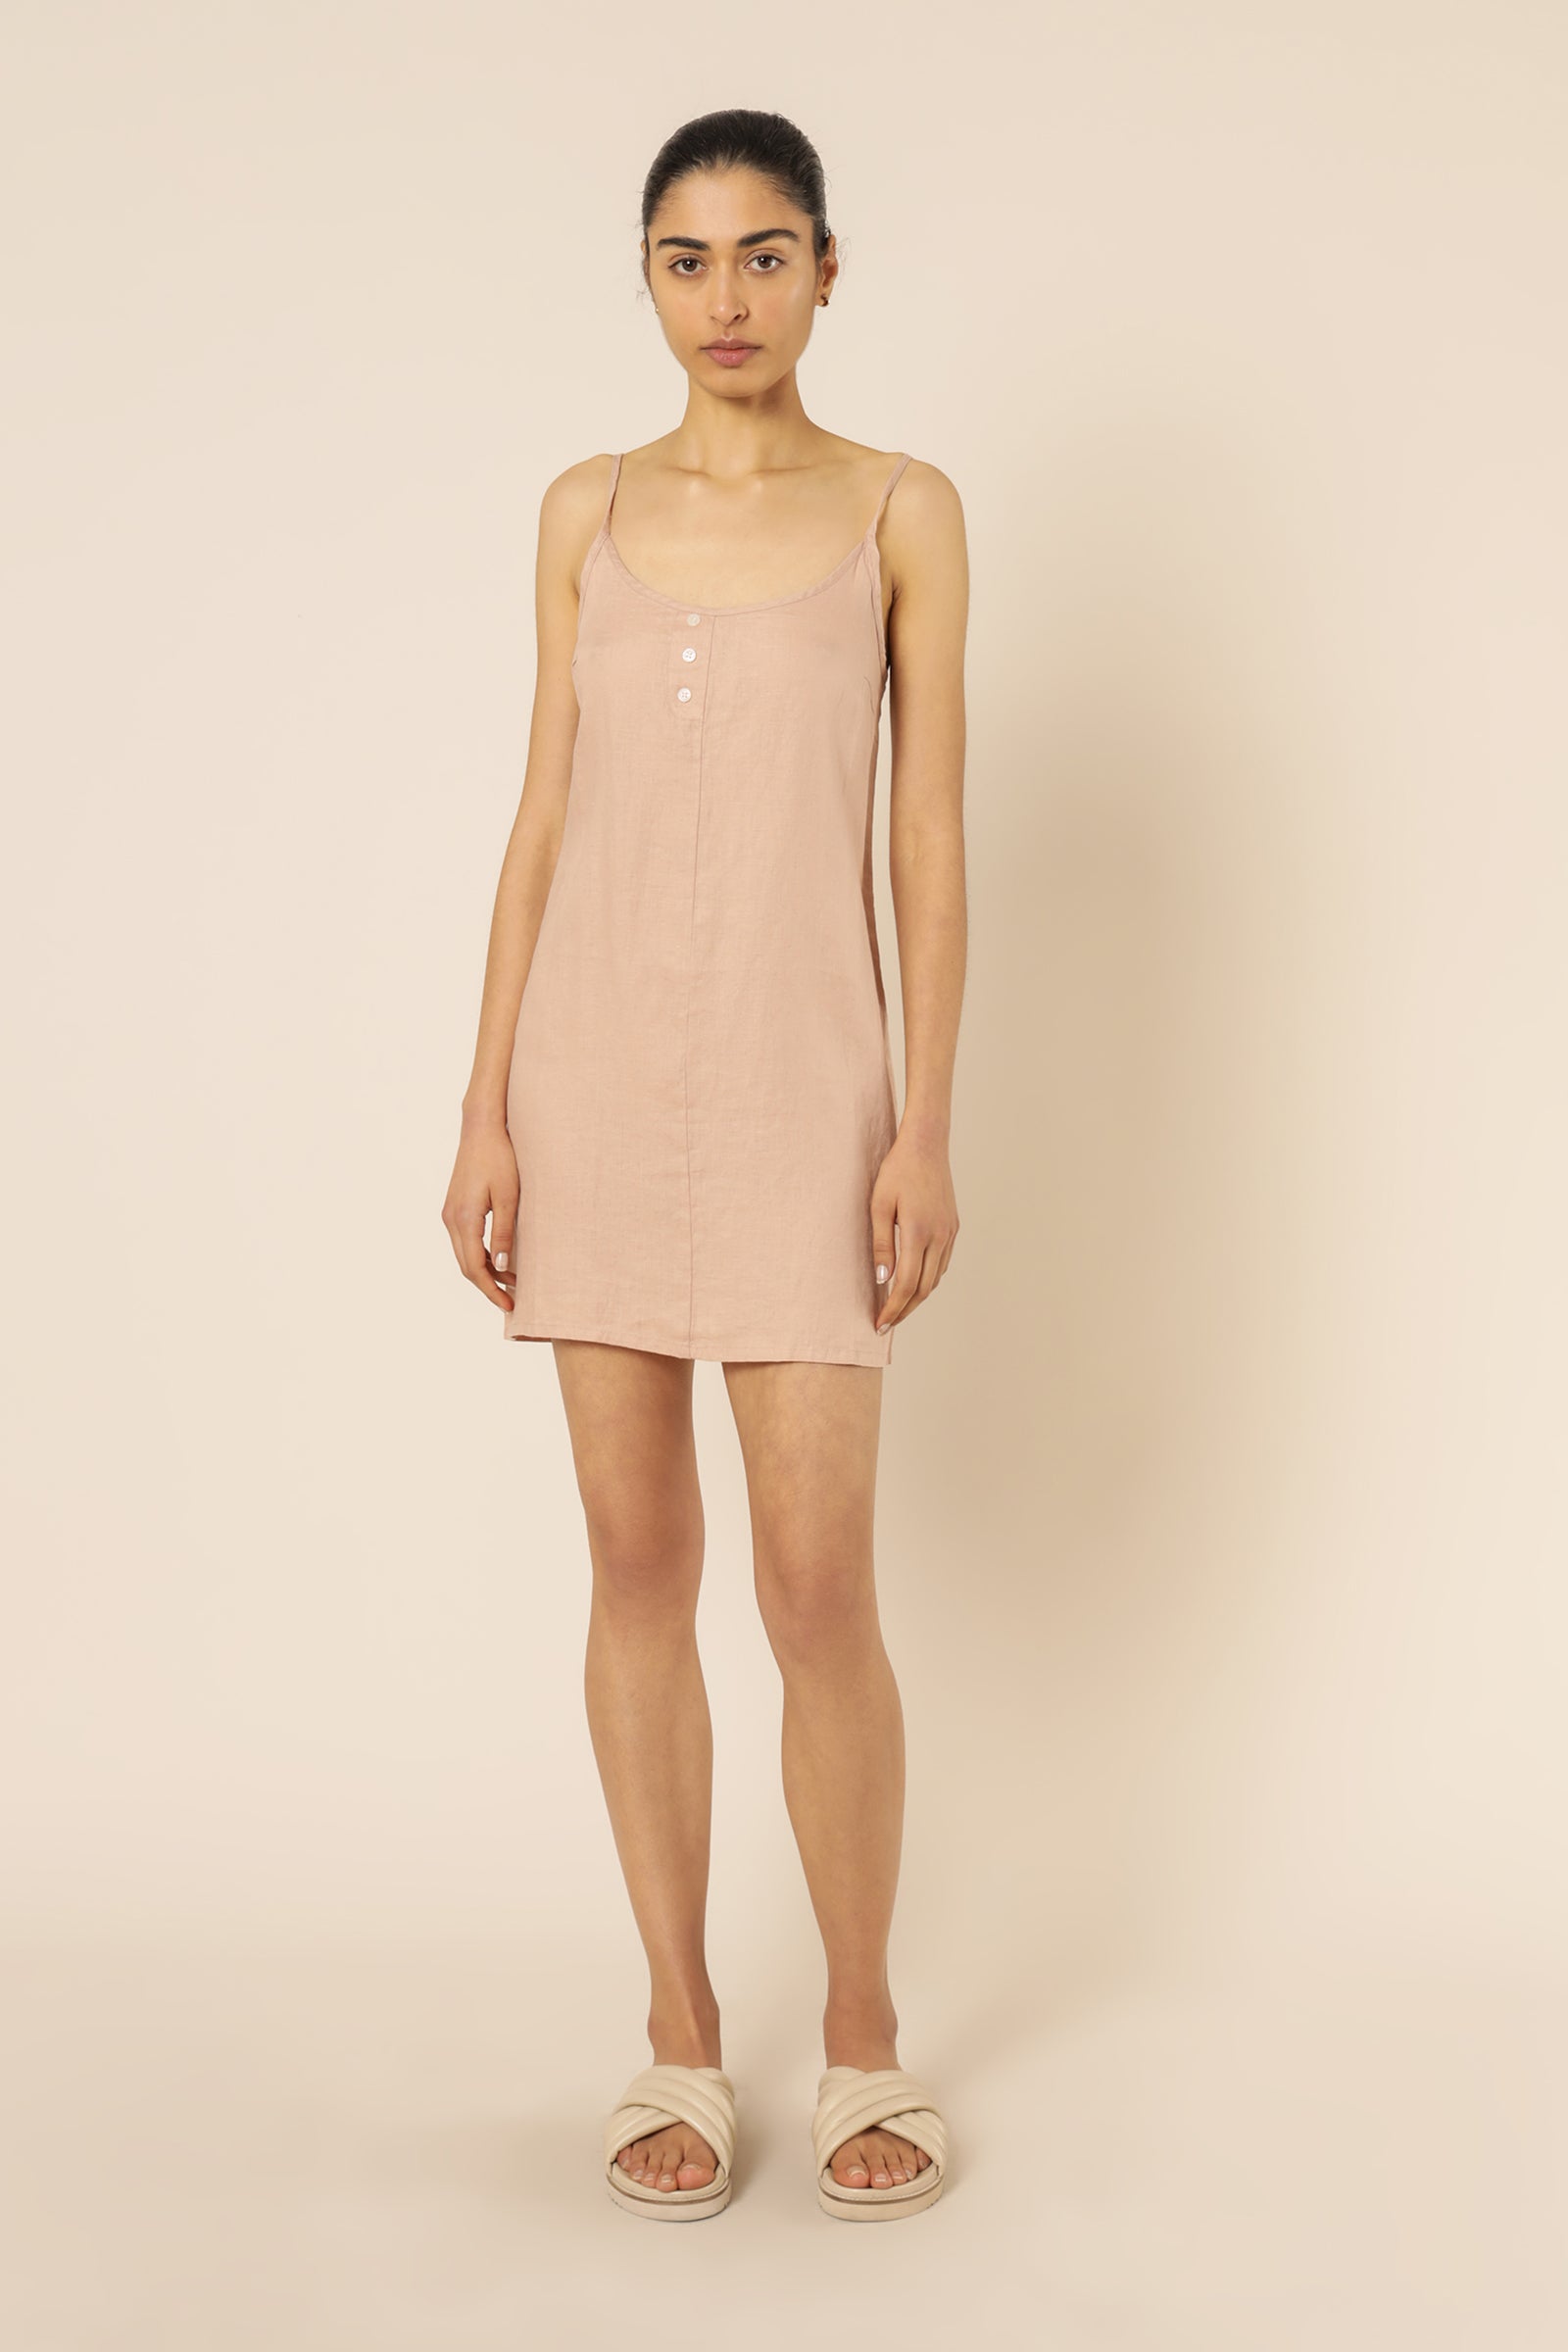 Nude Lucy nude linen lounge dress clay dress